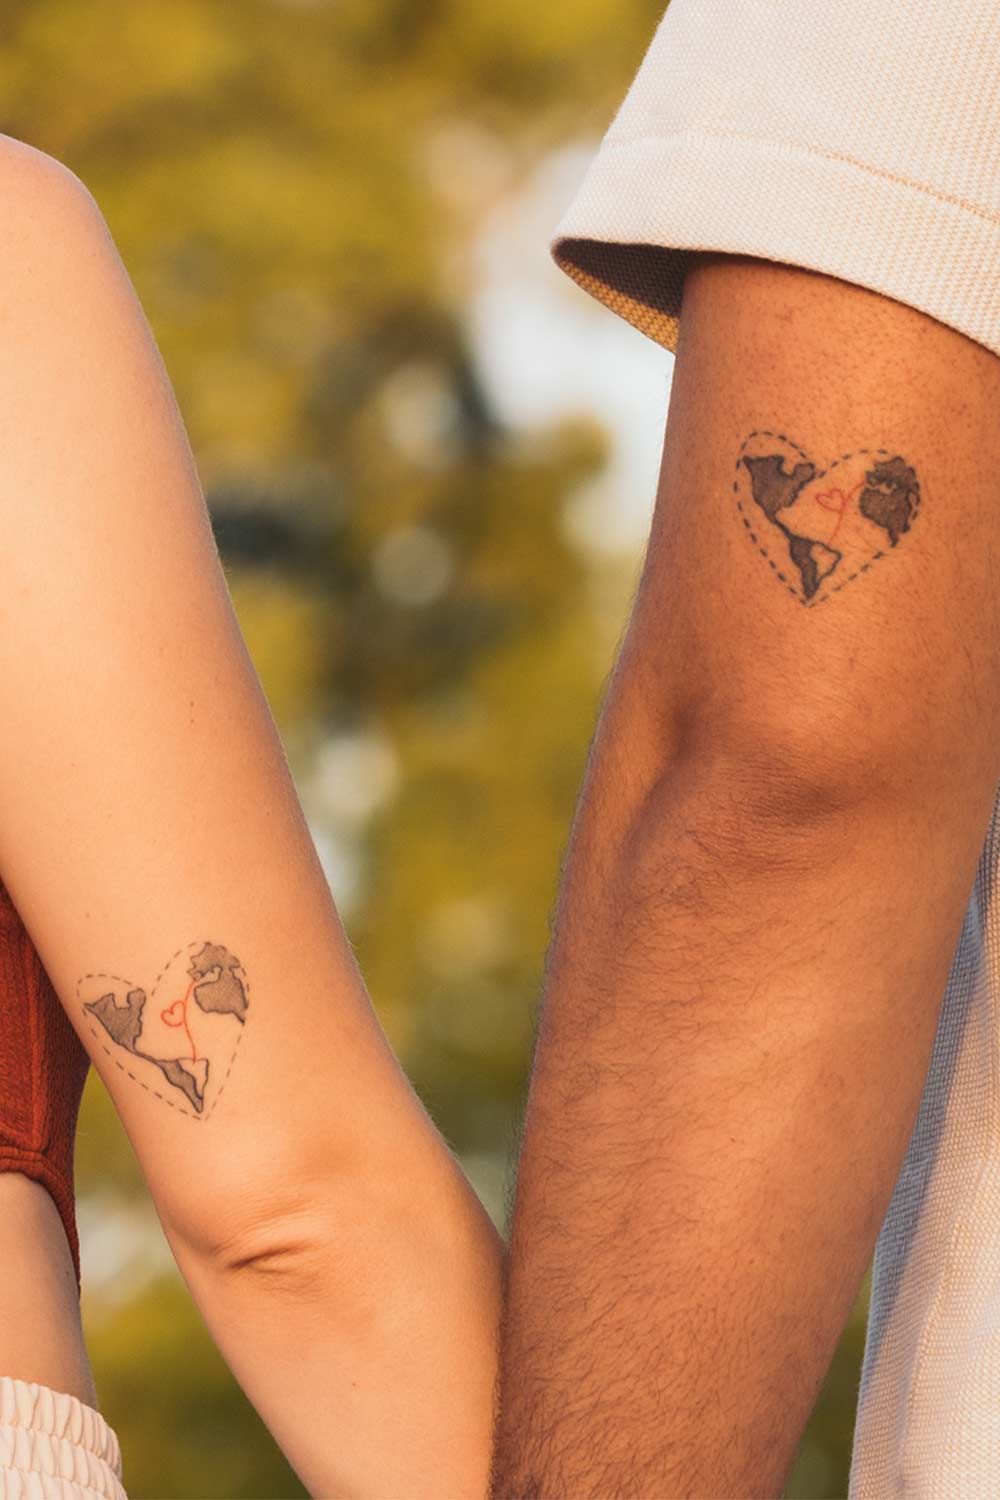 Husband and wife matching tattoos. Super dope concept for a beautiful  couple! @hollywdbca | Instagram